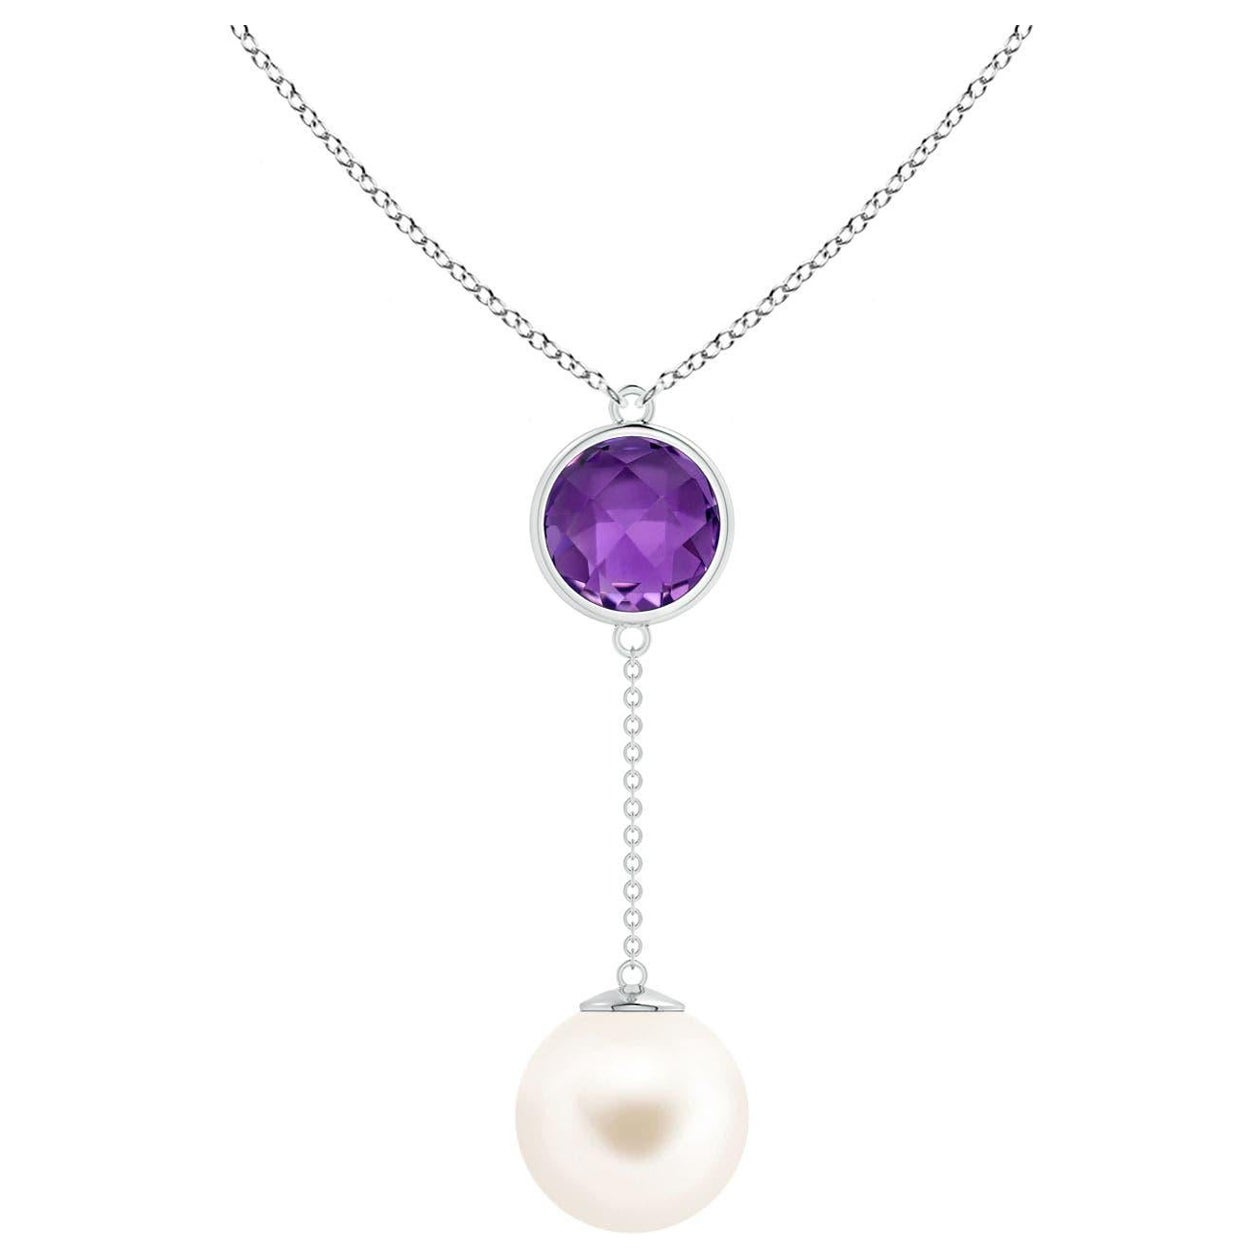 Freshwater Cultured Pearl & 2.85ct Amethyst Lariat Necklace in 14K White Gold